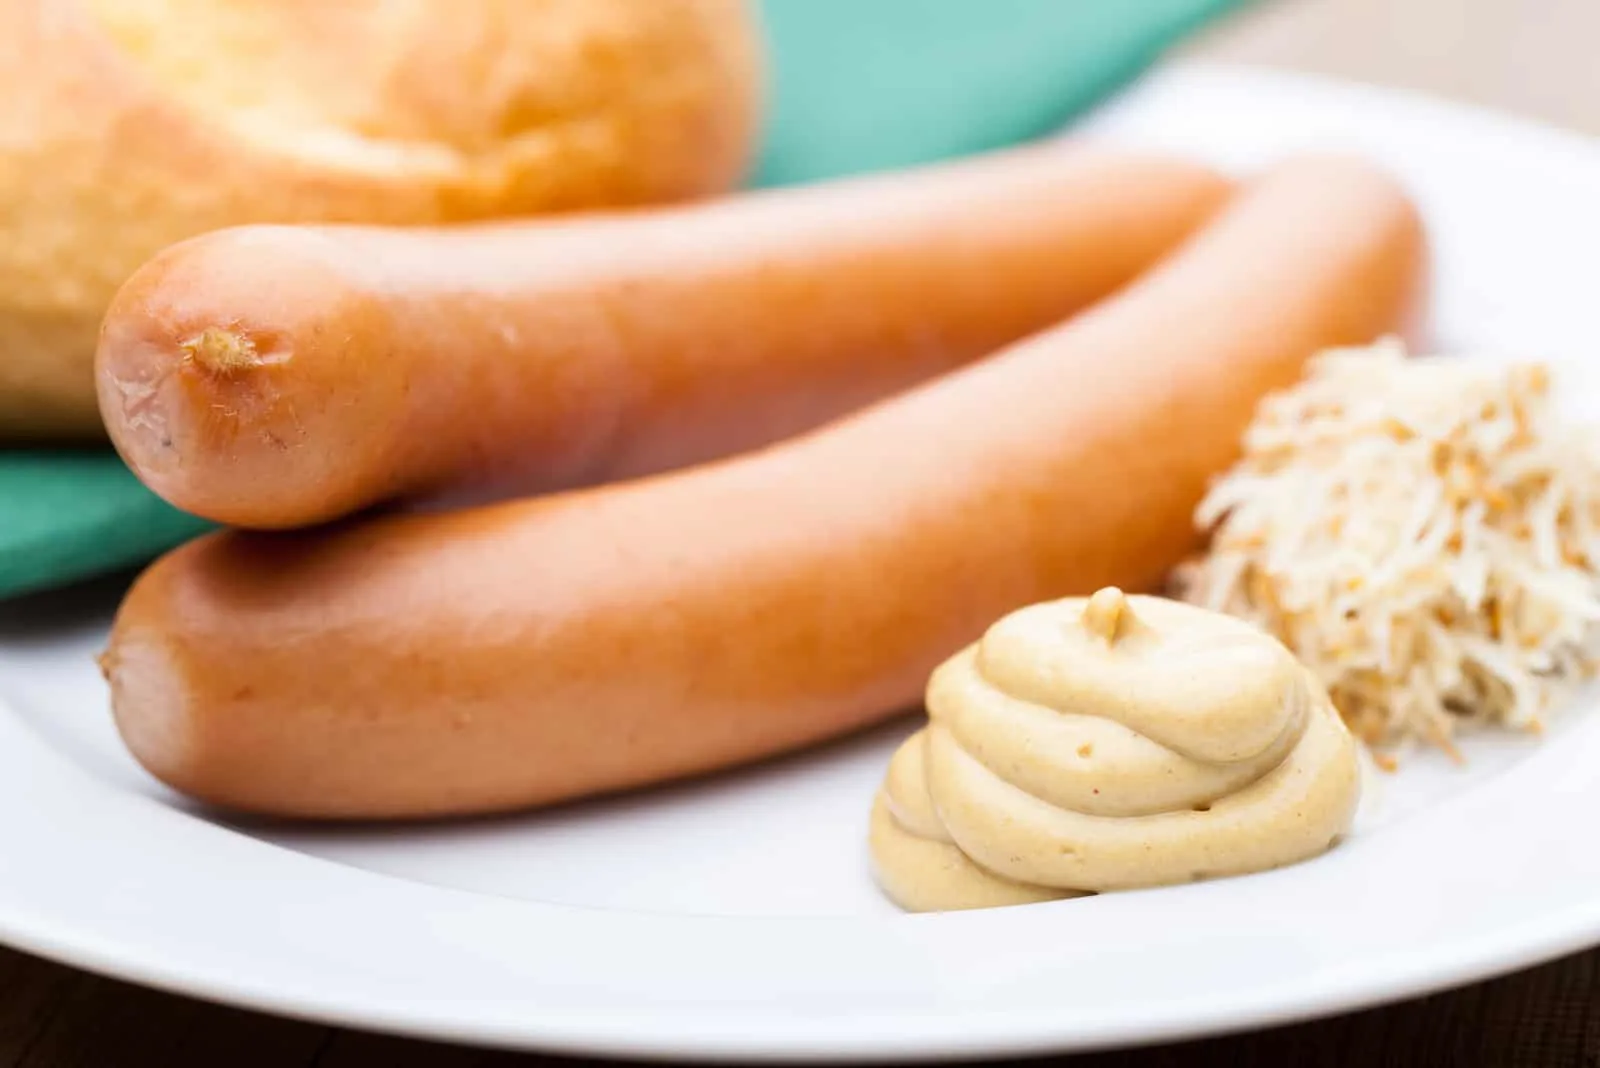 Vienna sausages with bread, horseradish and mustard